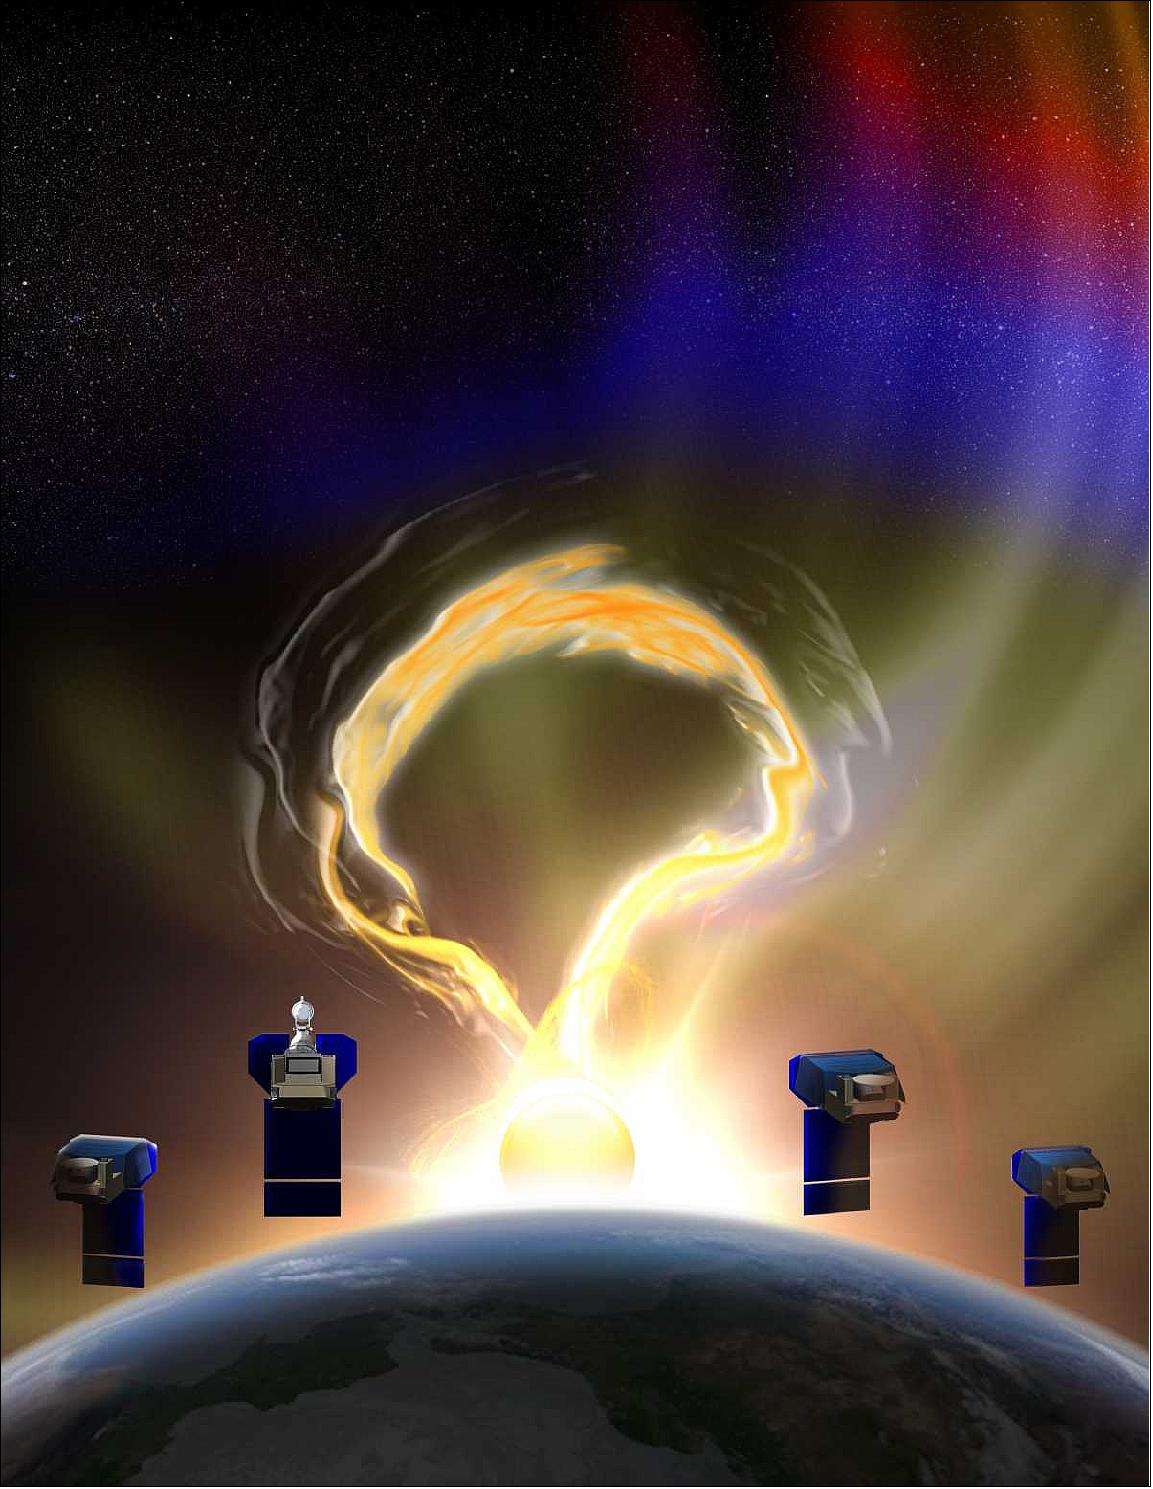 Figure 28: SwRI is developing the concept for a small satellite mission to image the Sun’s outer corona. PUNCH proposes a constellation of four suitcase-sized satellites that will orbit the Earth, studying how the Sun’s corona connects with the interplanetary medium, to better understand how coronal structures fuel the solar wind with mass and energy (image credit: SwRI)